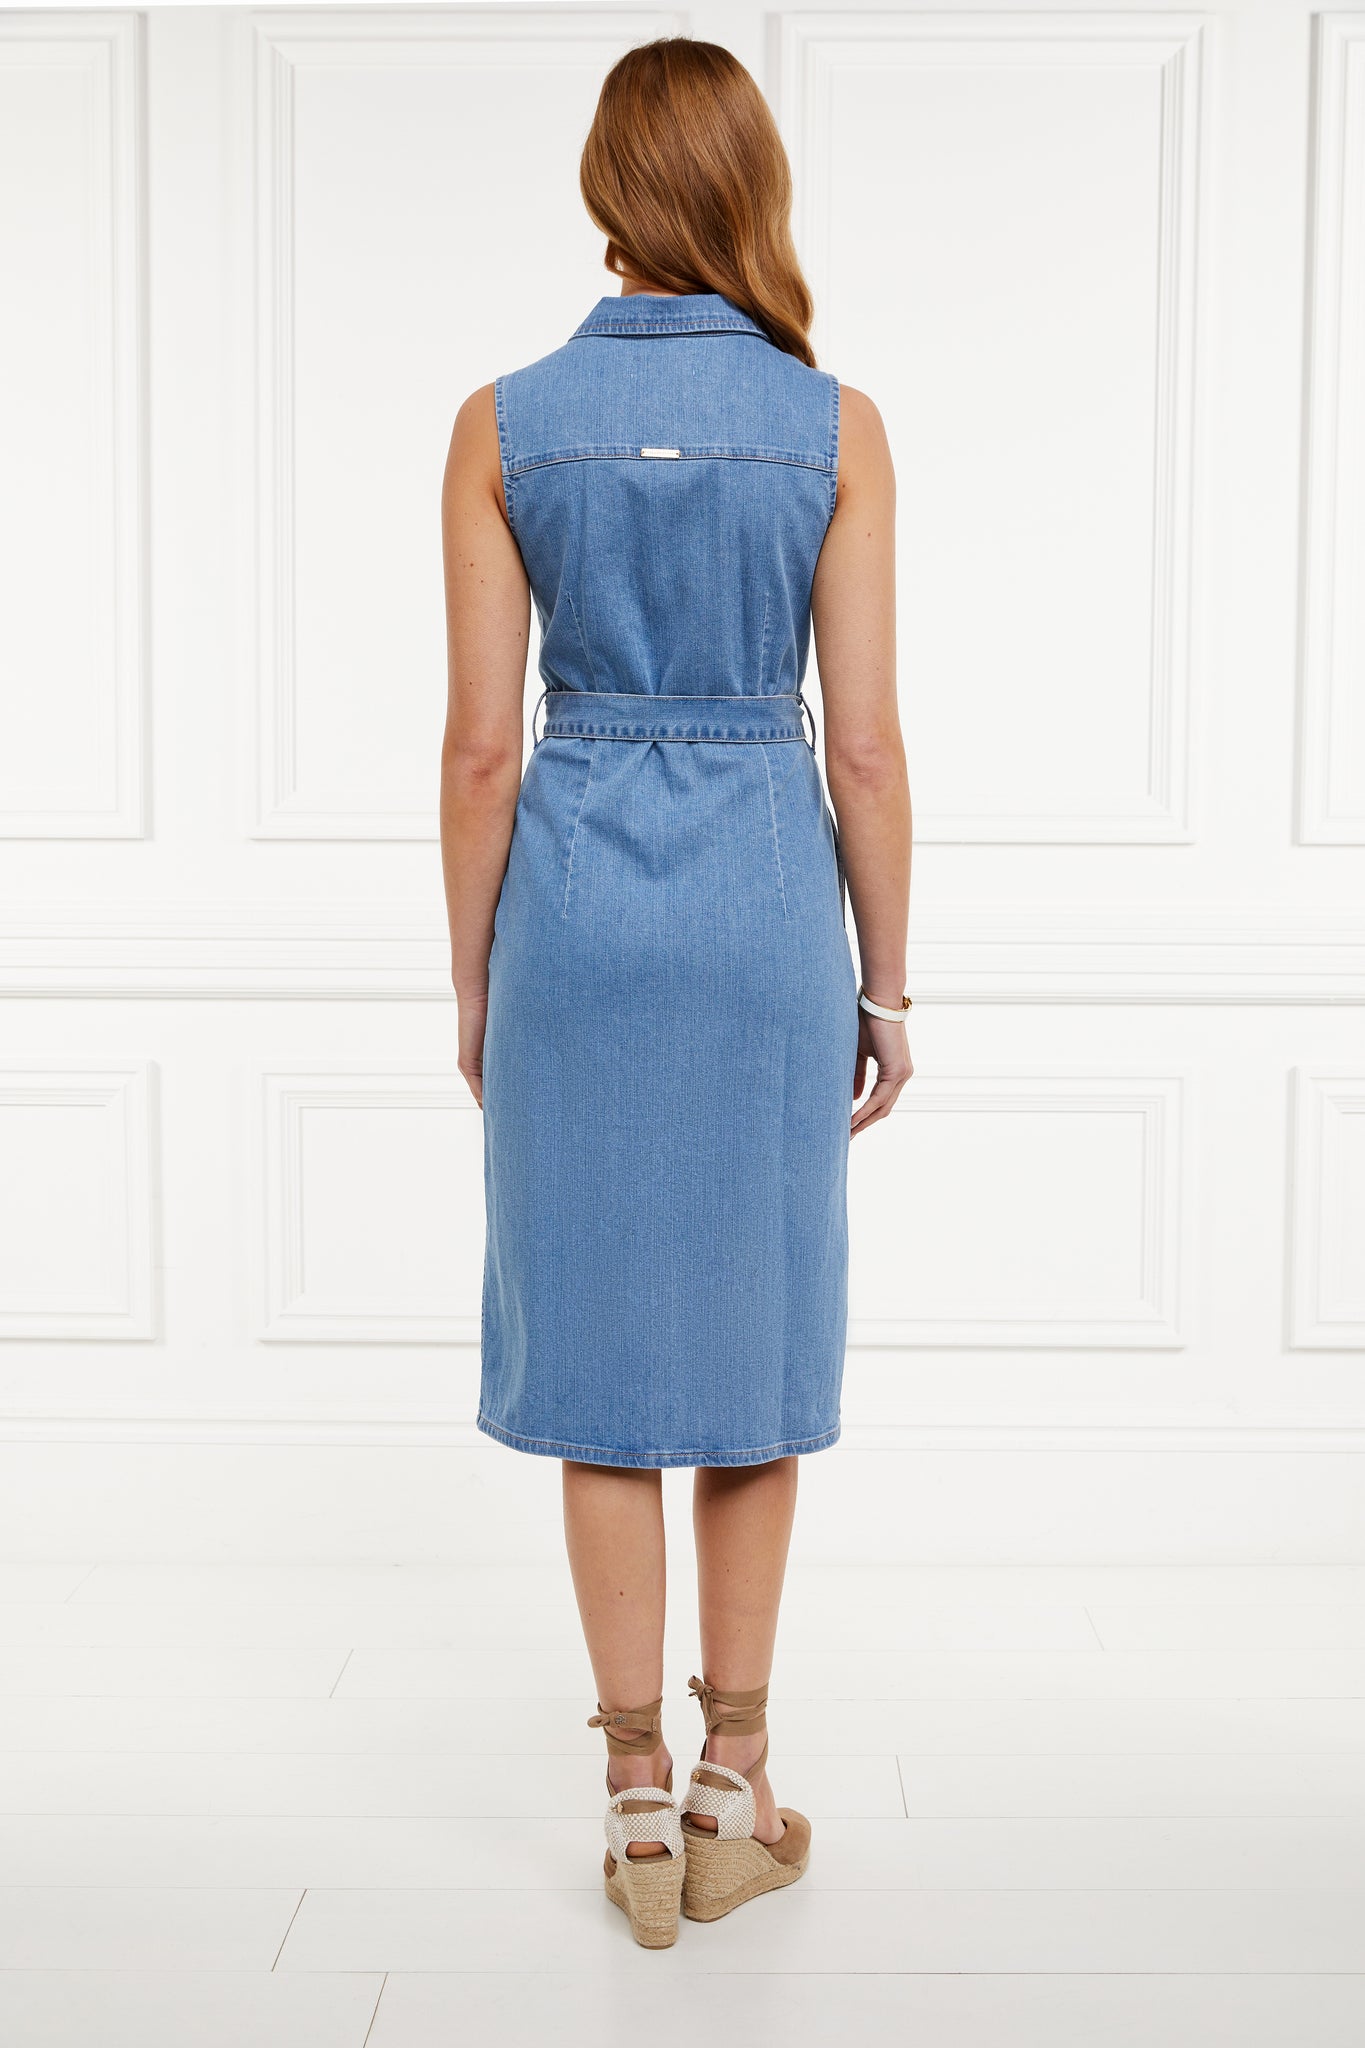 back shot of womens blue denim sleeveless midi dress with tie around the waist and gold buttons down the front